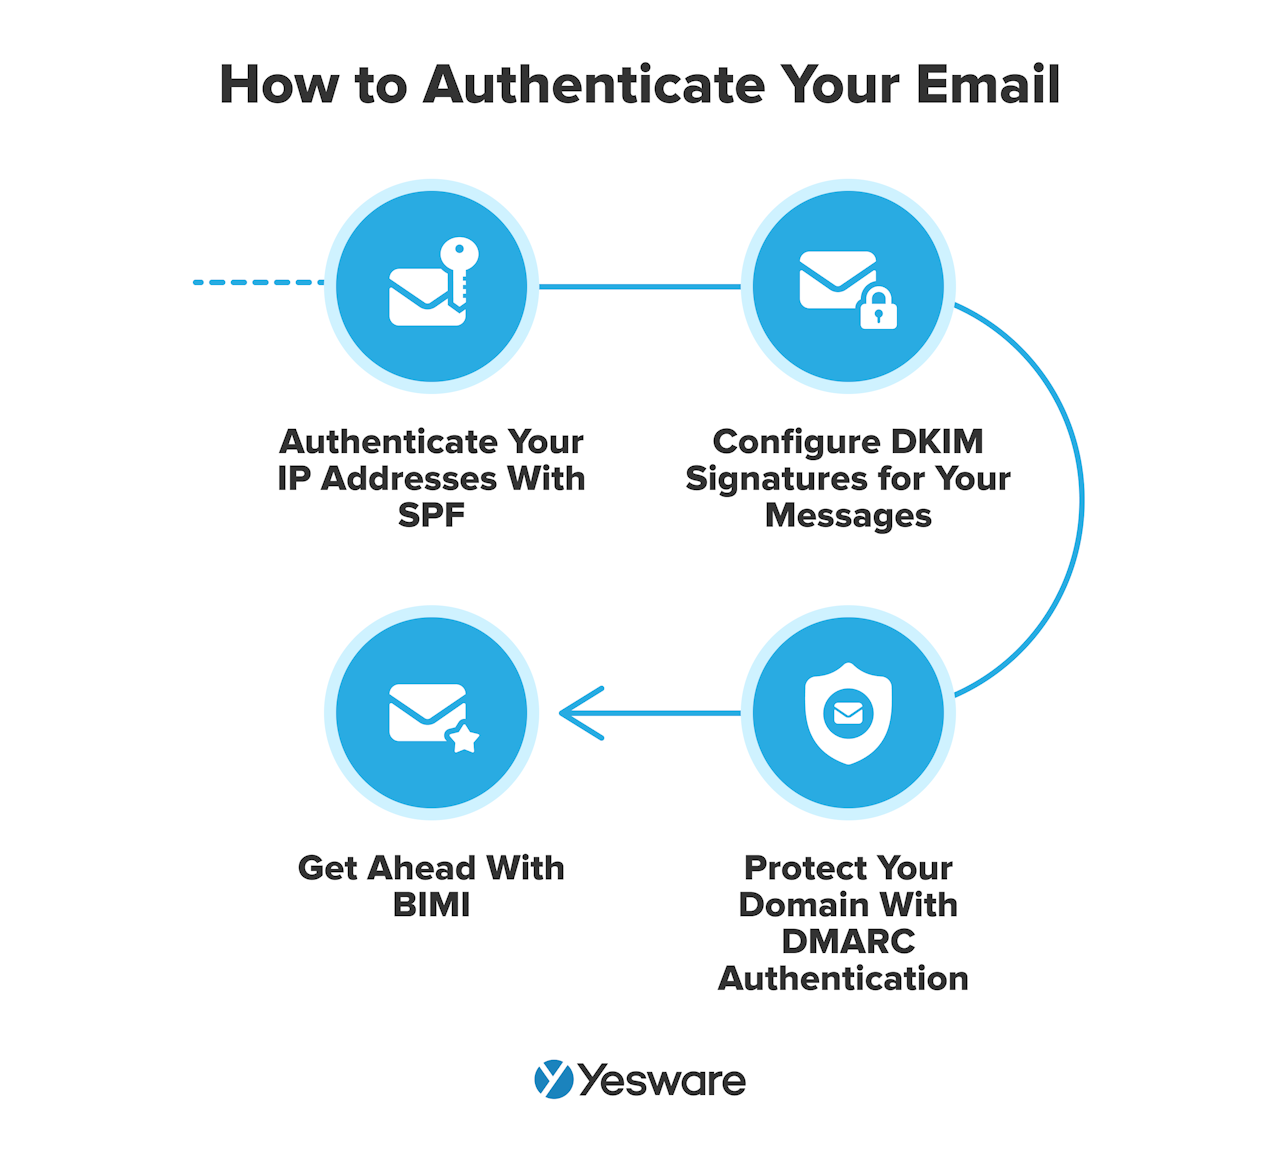 sales by email: how to authenticate your email